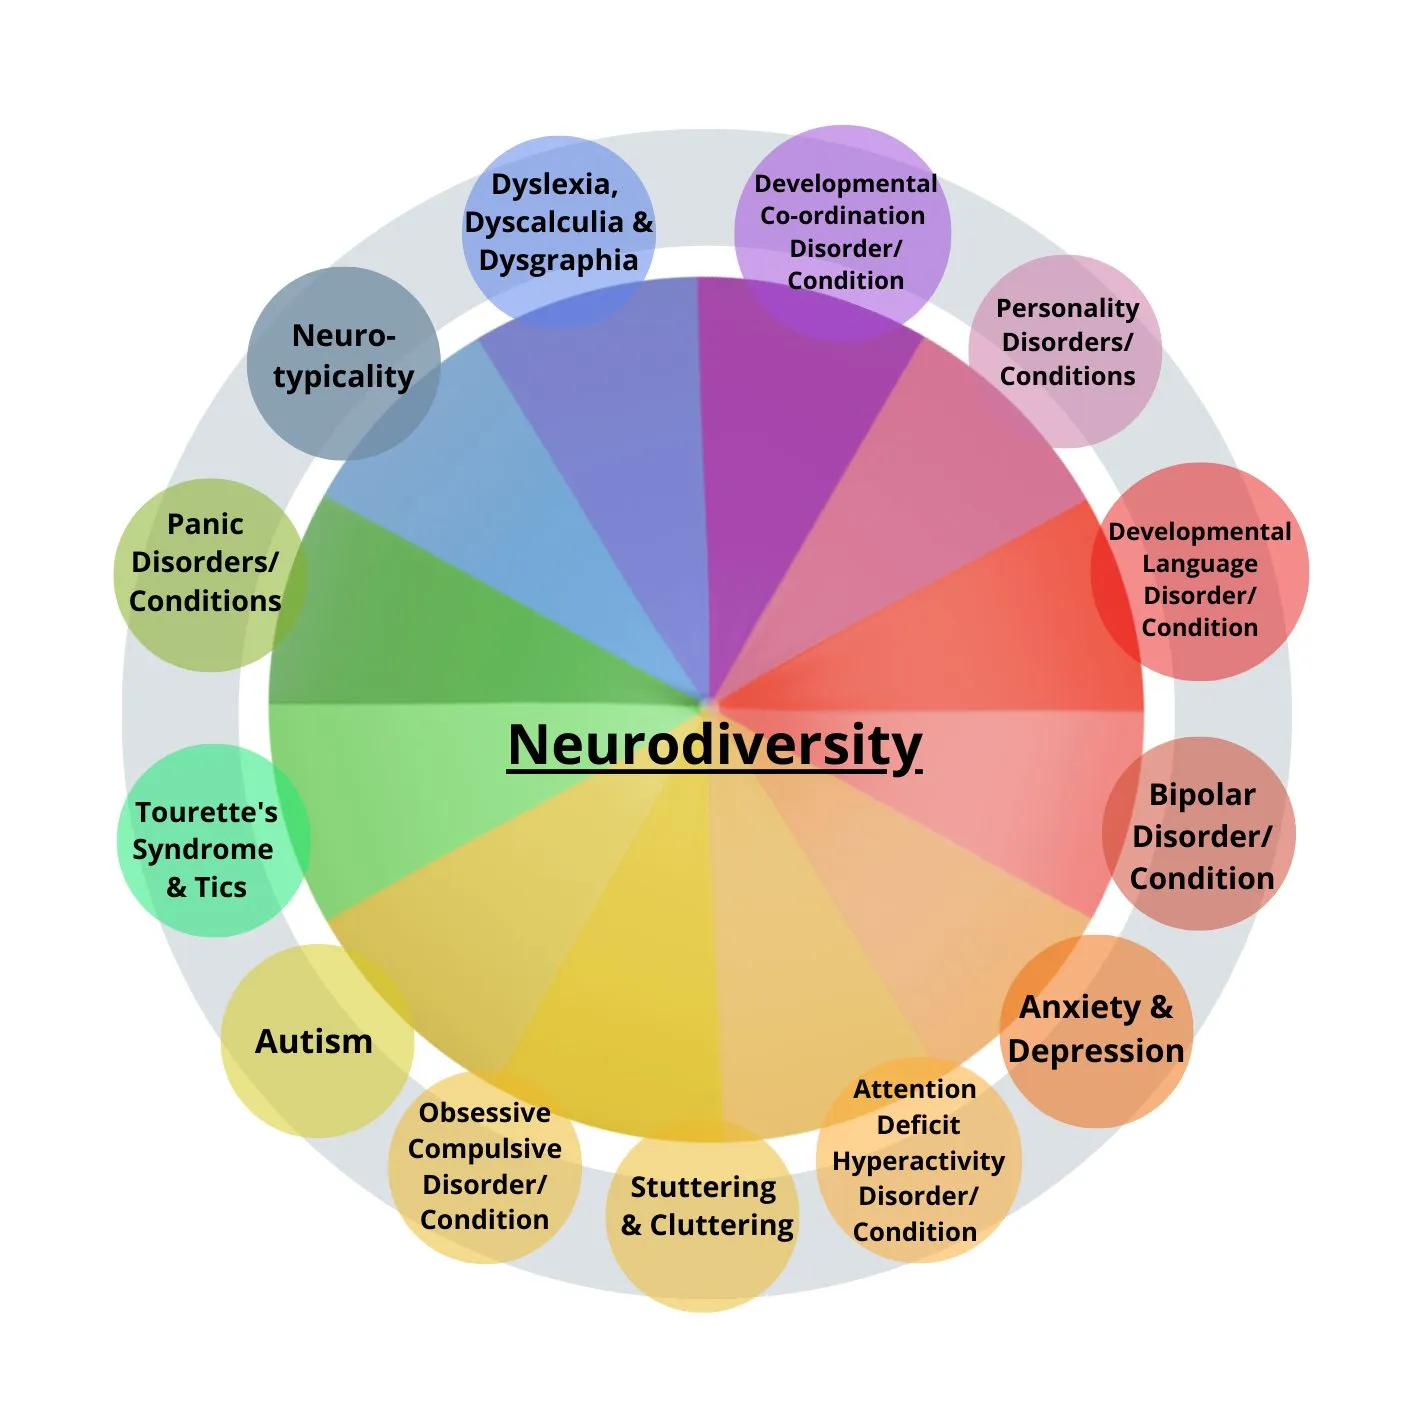 Neurodiversity is in the middle of a circle. Different diagnoses are around the circle. 